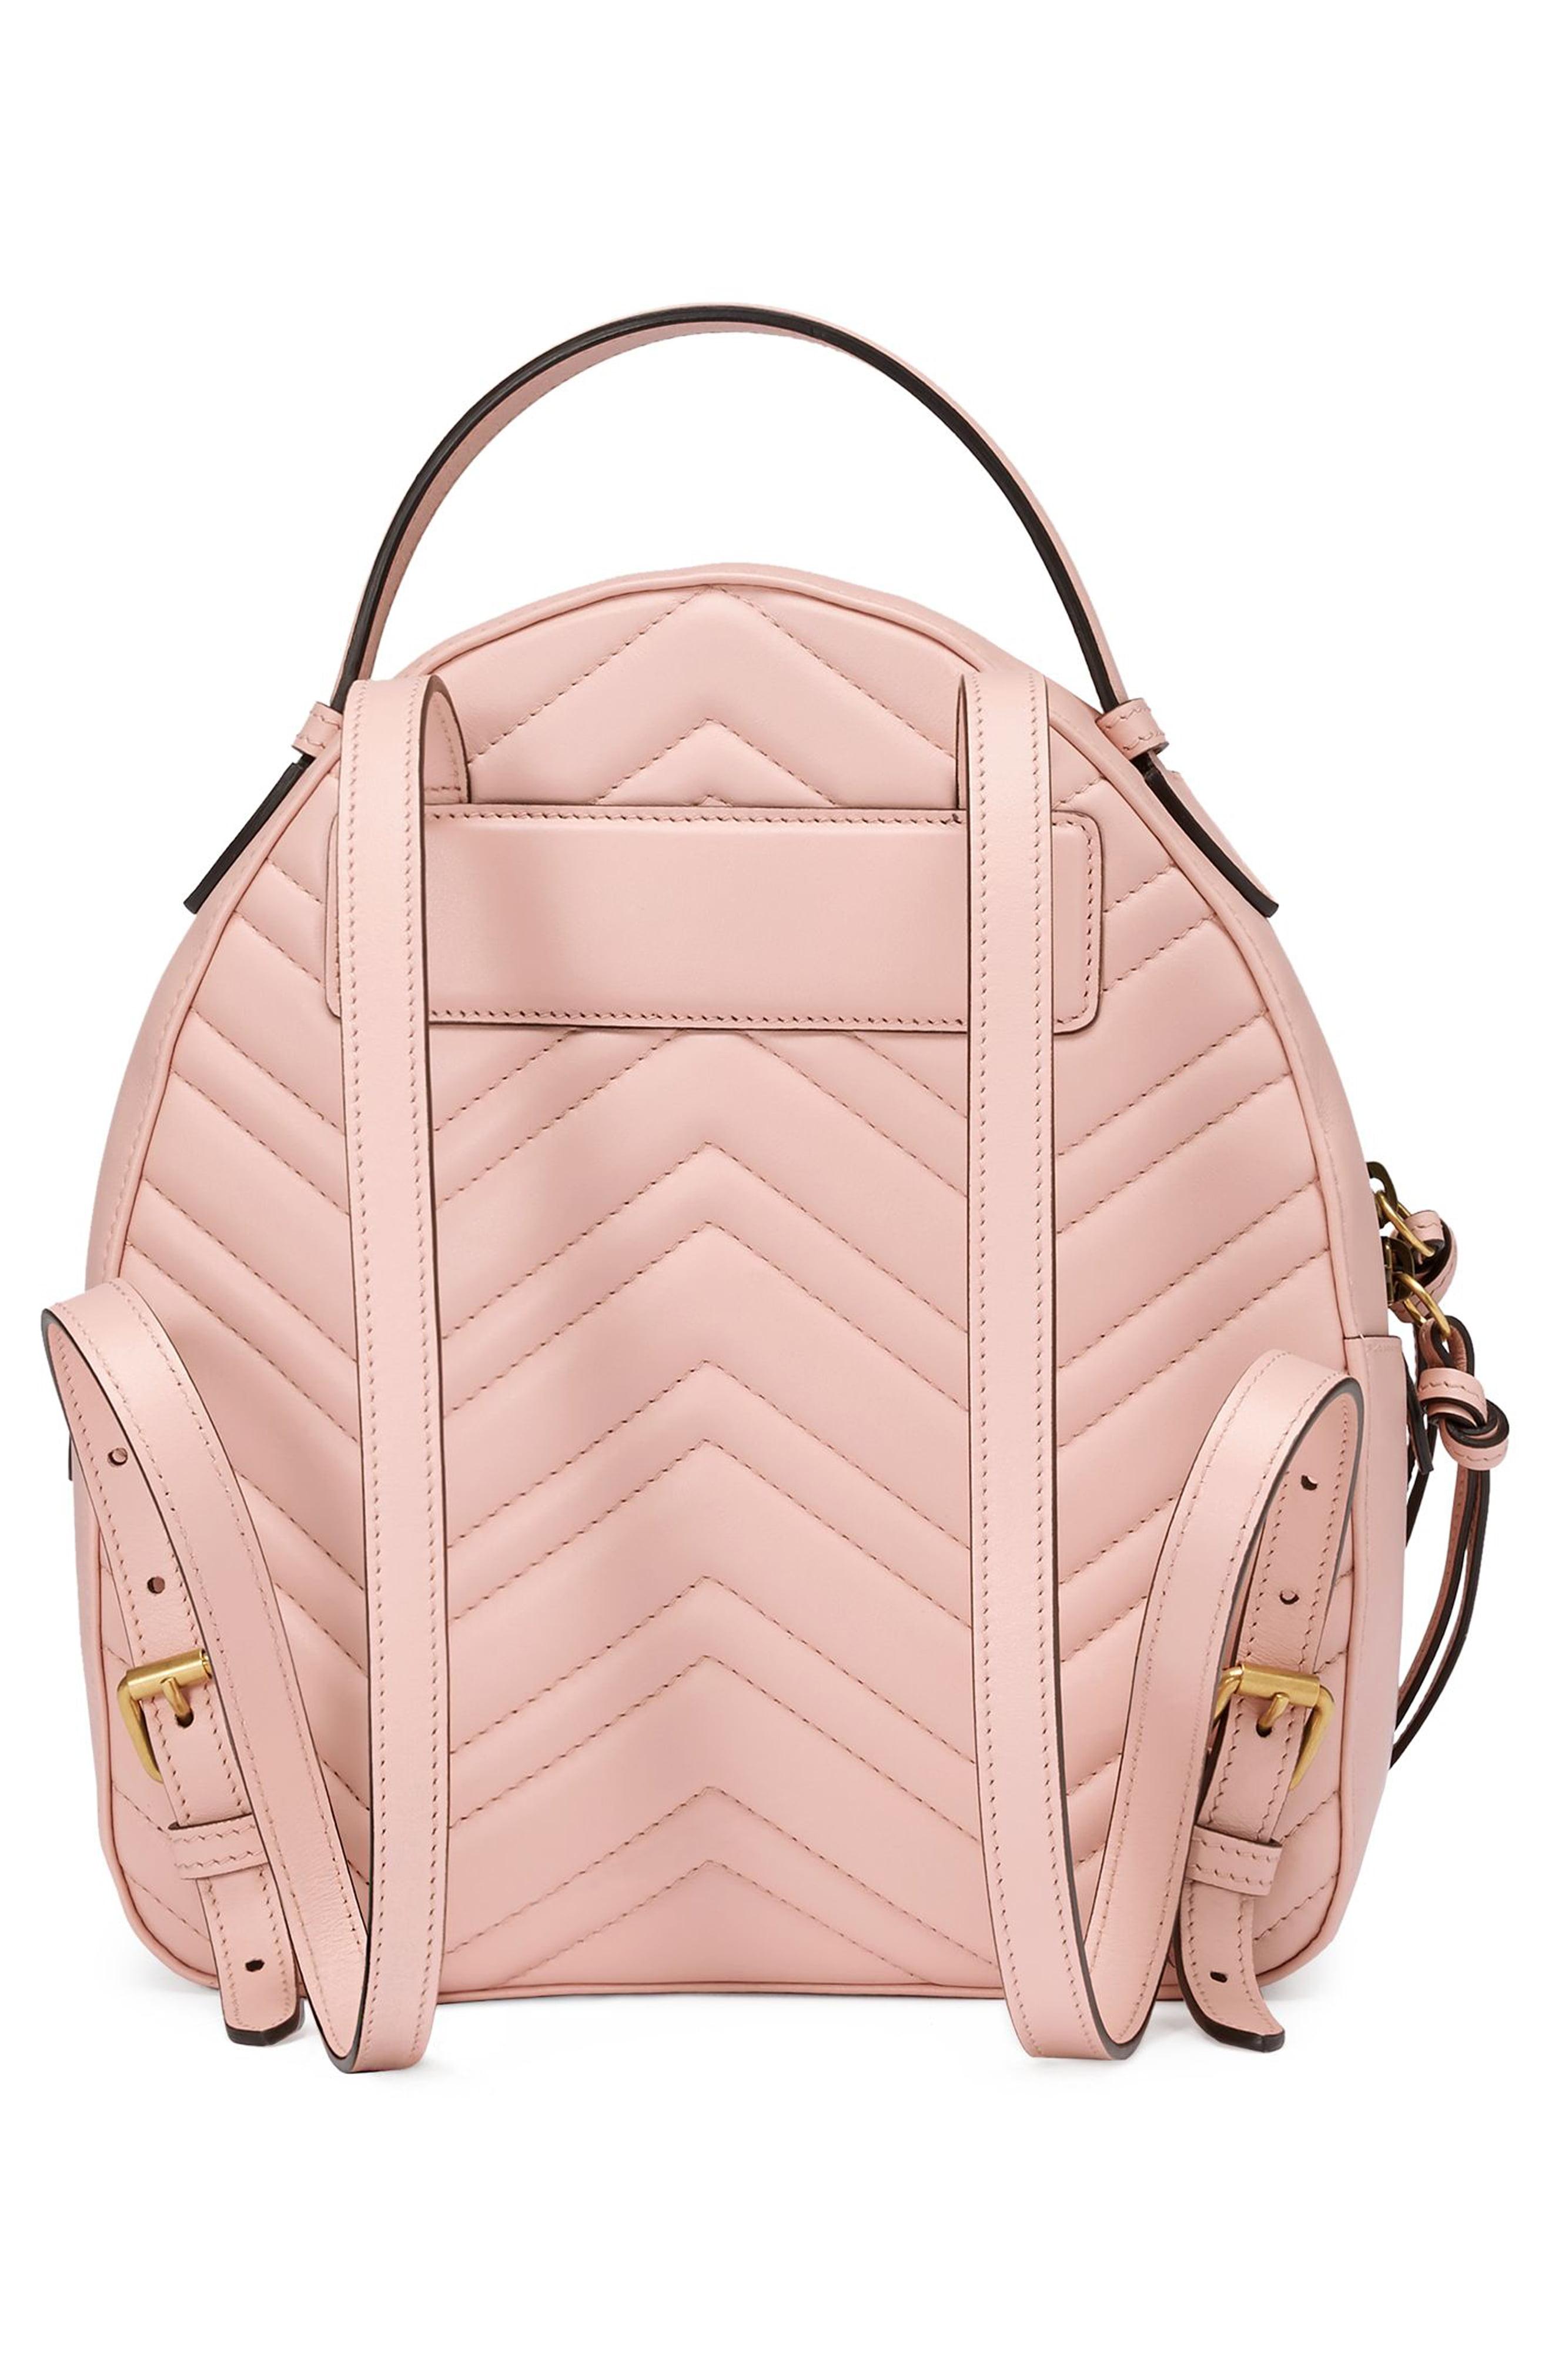 GUCCI backpack pink for girls